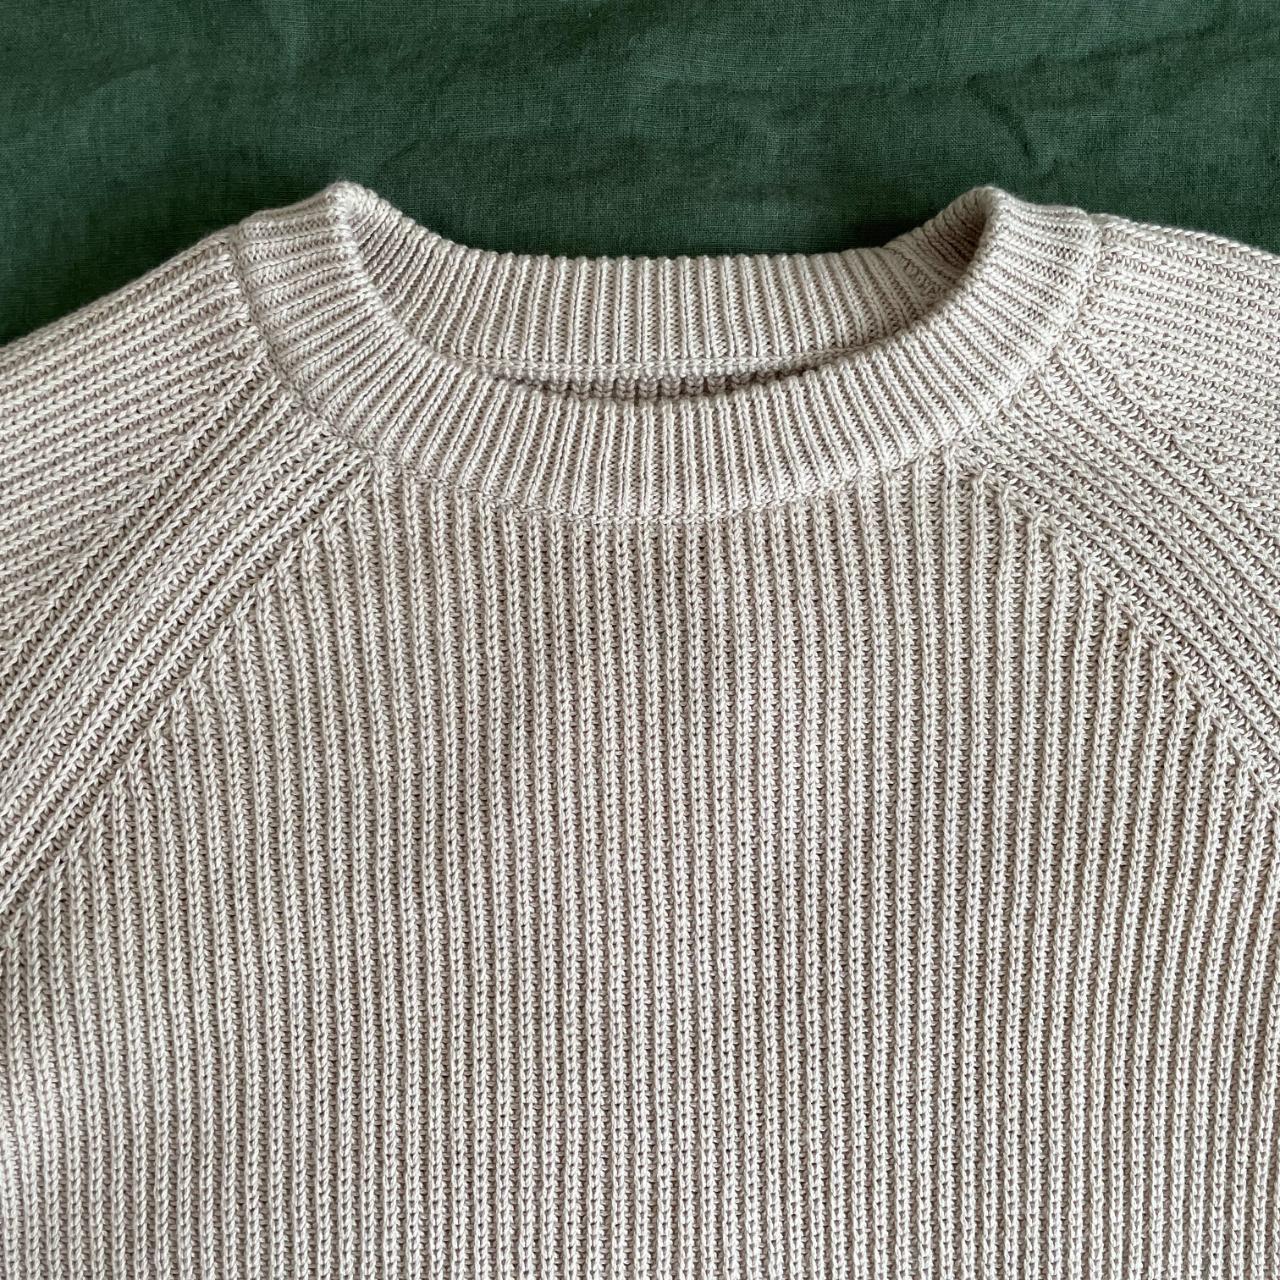 Norse Projects Roald Cotton sweater BRAND... - Depop